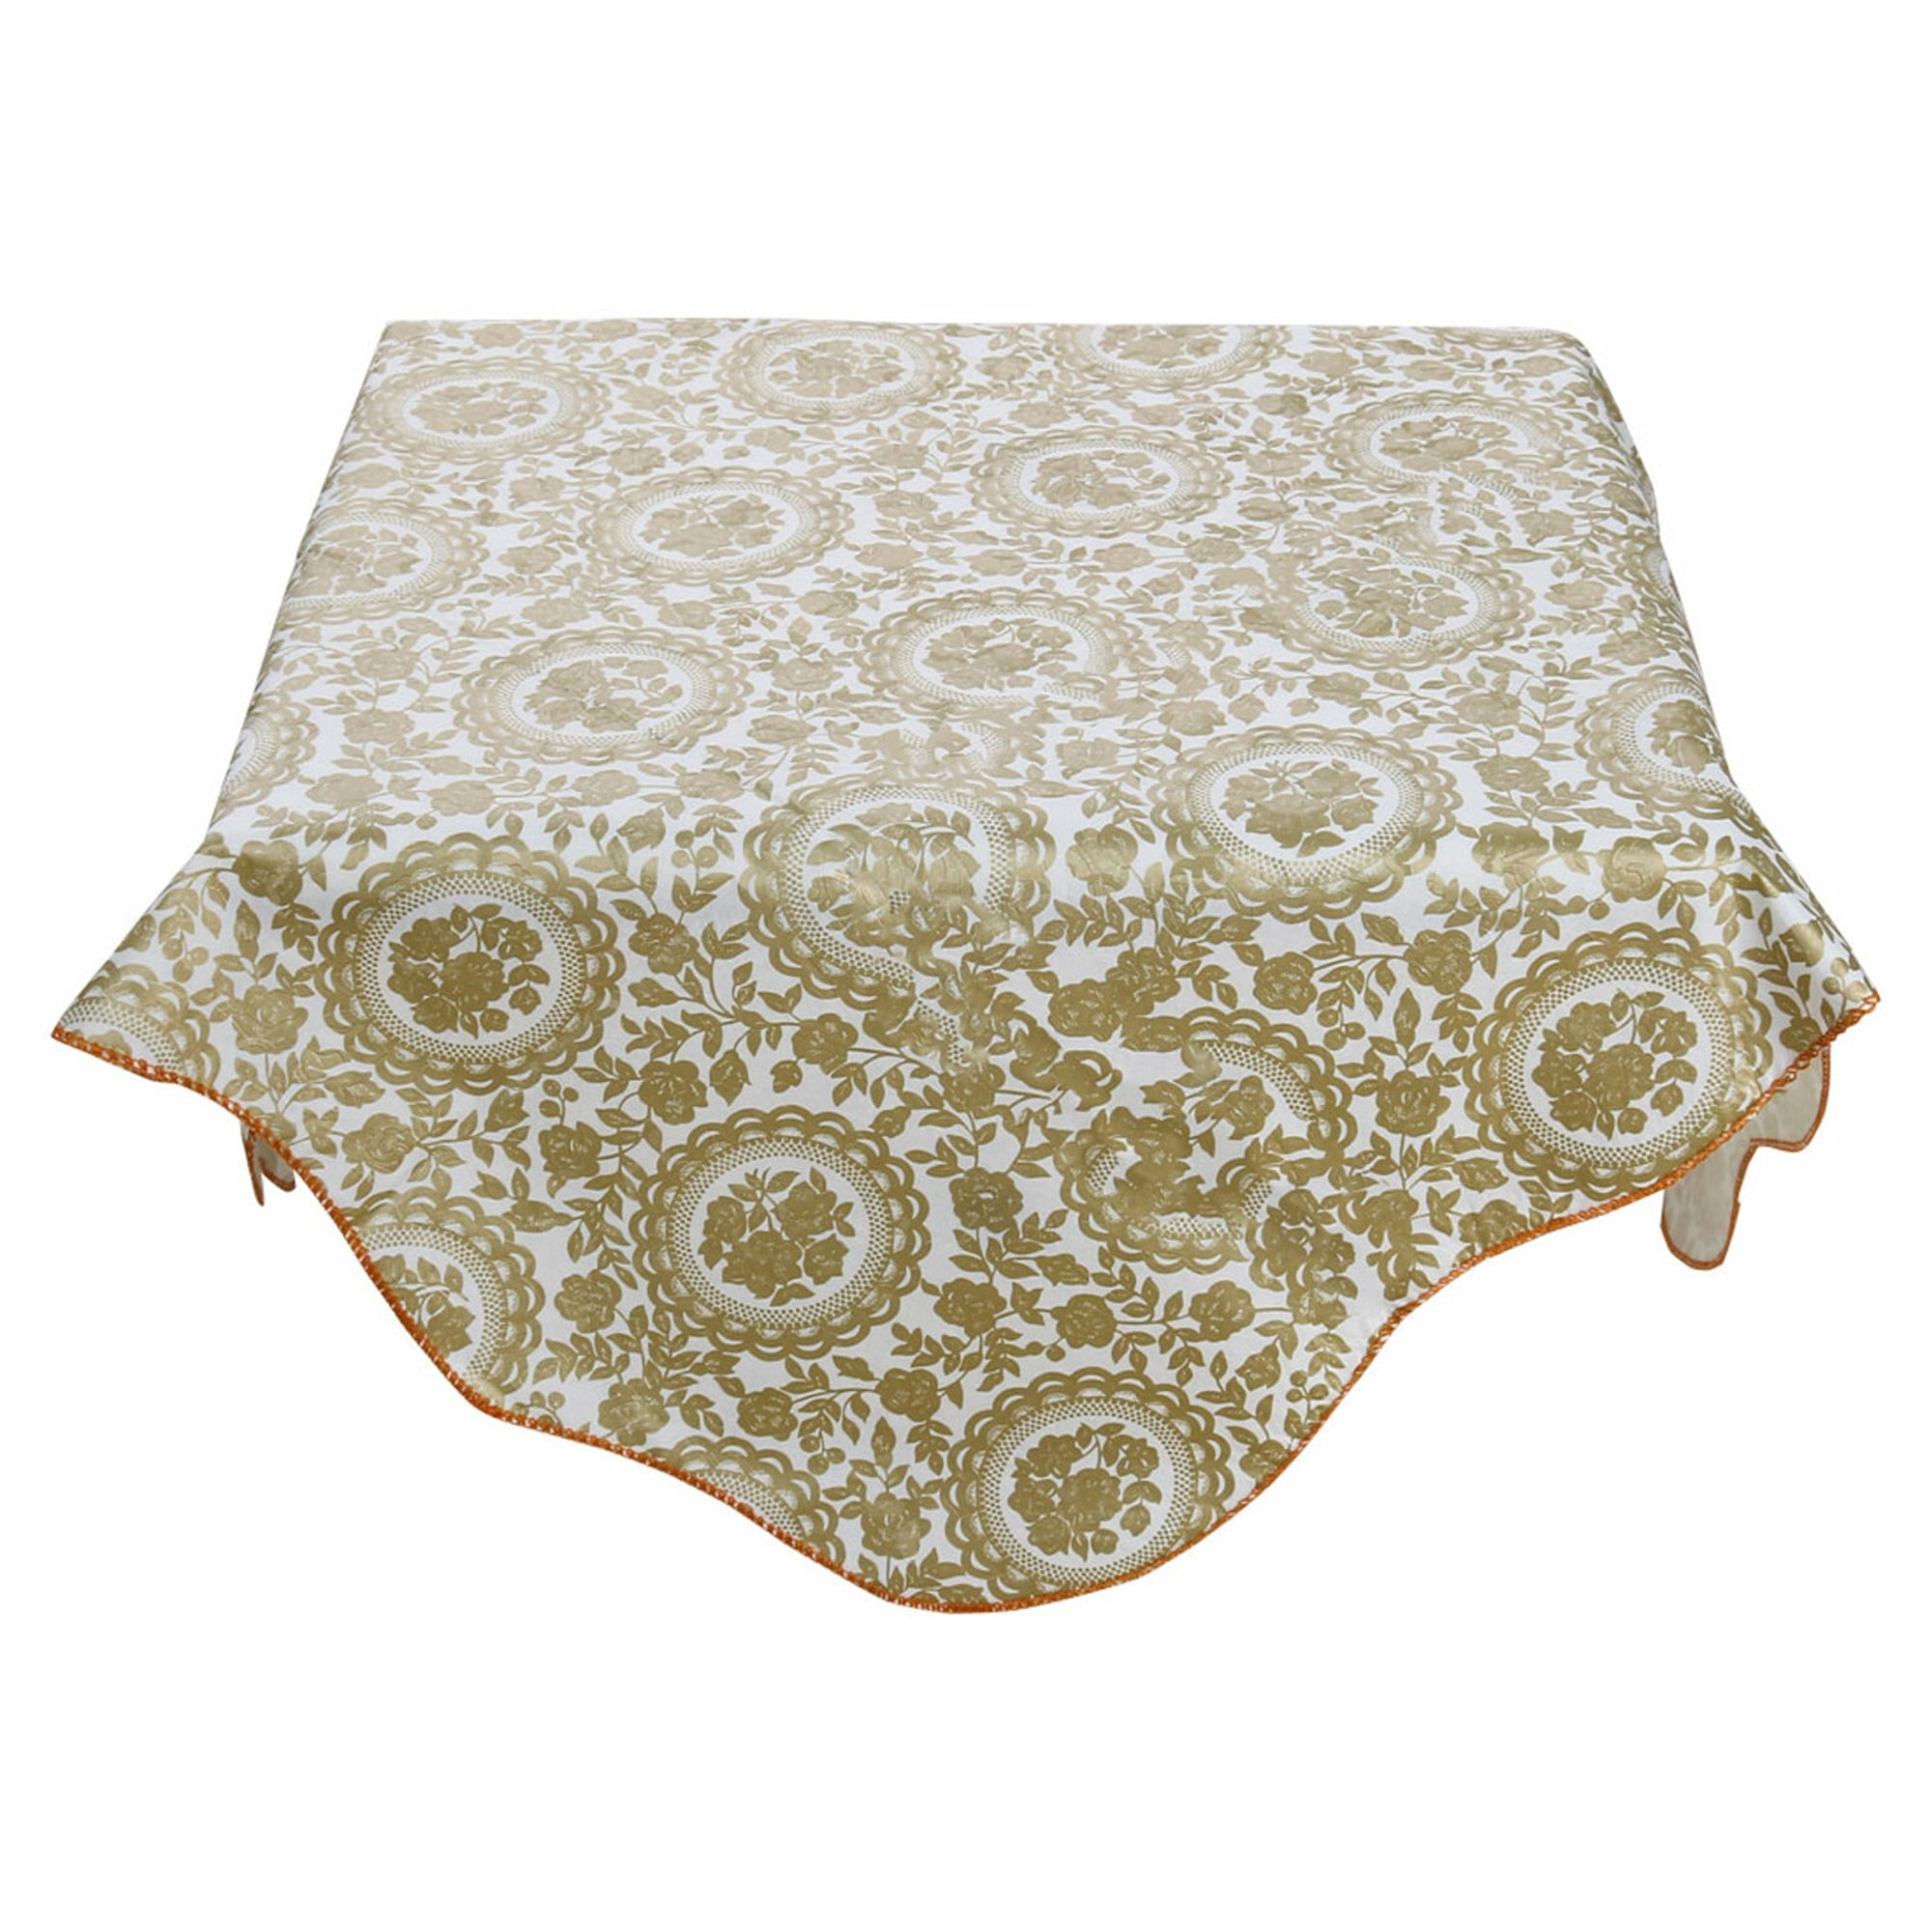 Vinyl Waterproof Lace Tablecloth,Table Cover for Rectangle Table 59x90in 